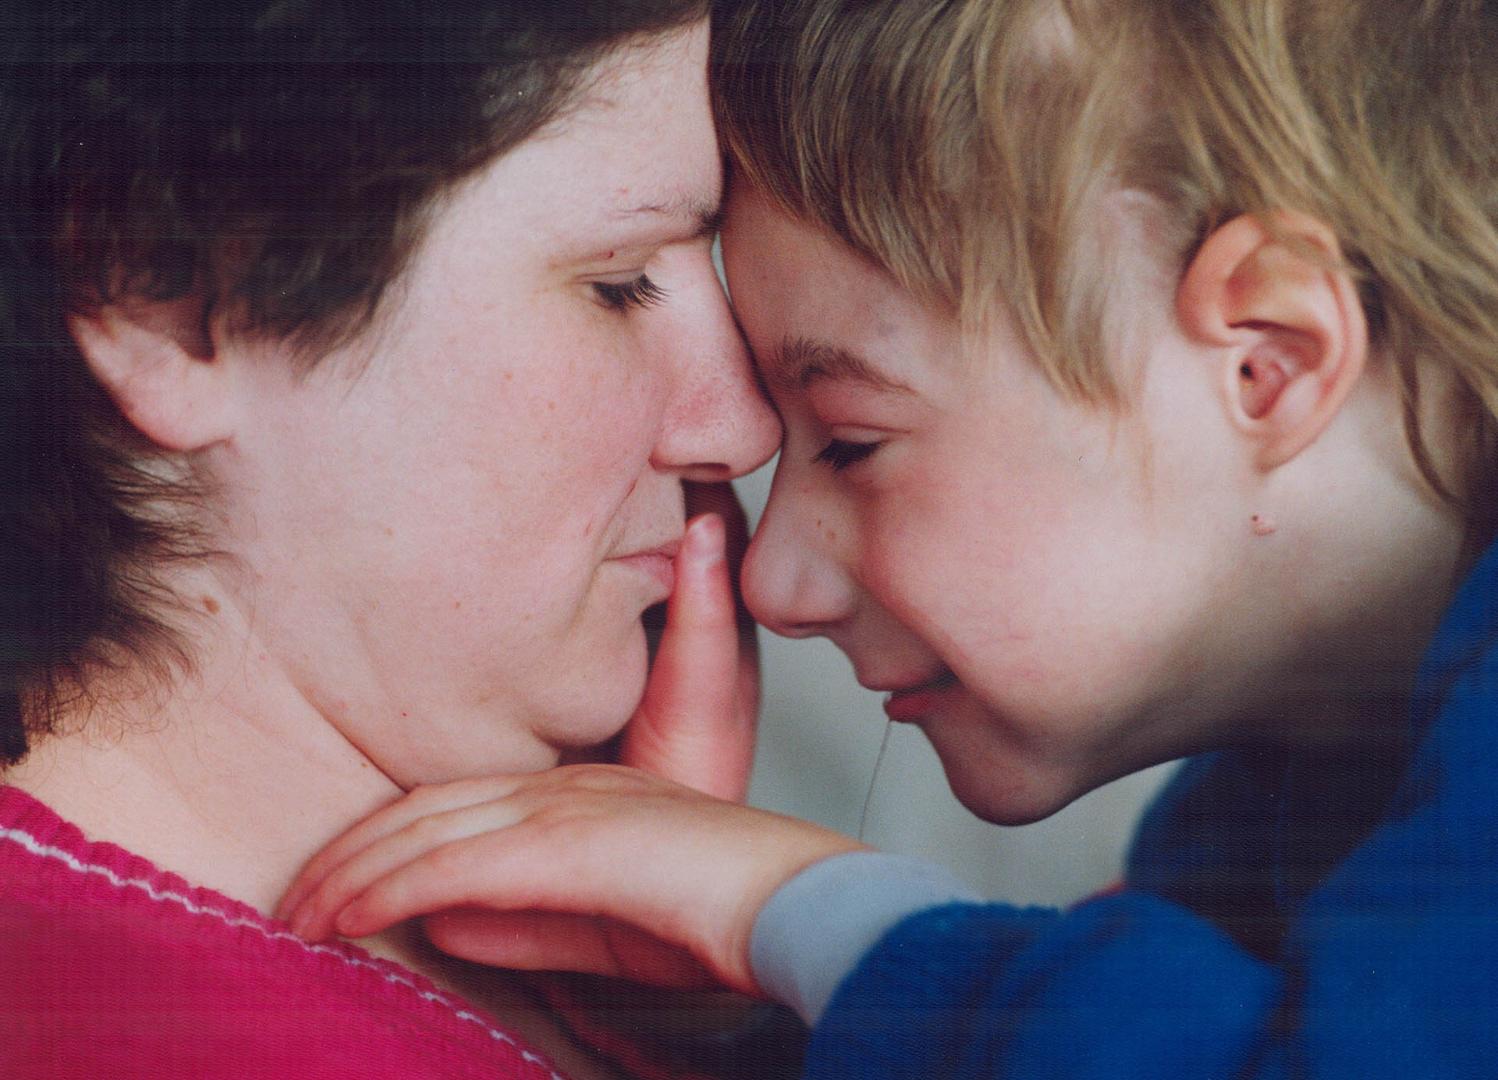 Joan Almey enjoys a tender moment with her 7-year-old son, Tommy, who wasn't expected to survive the genetic disorder trisomy 13. He has every right to live, she says